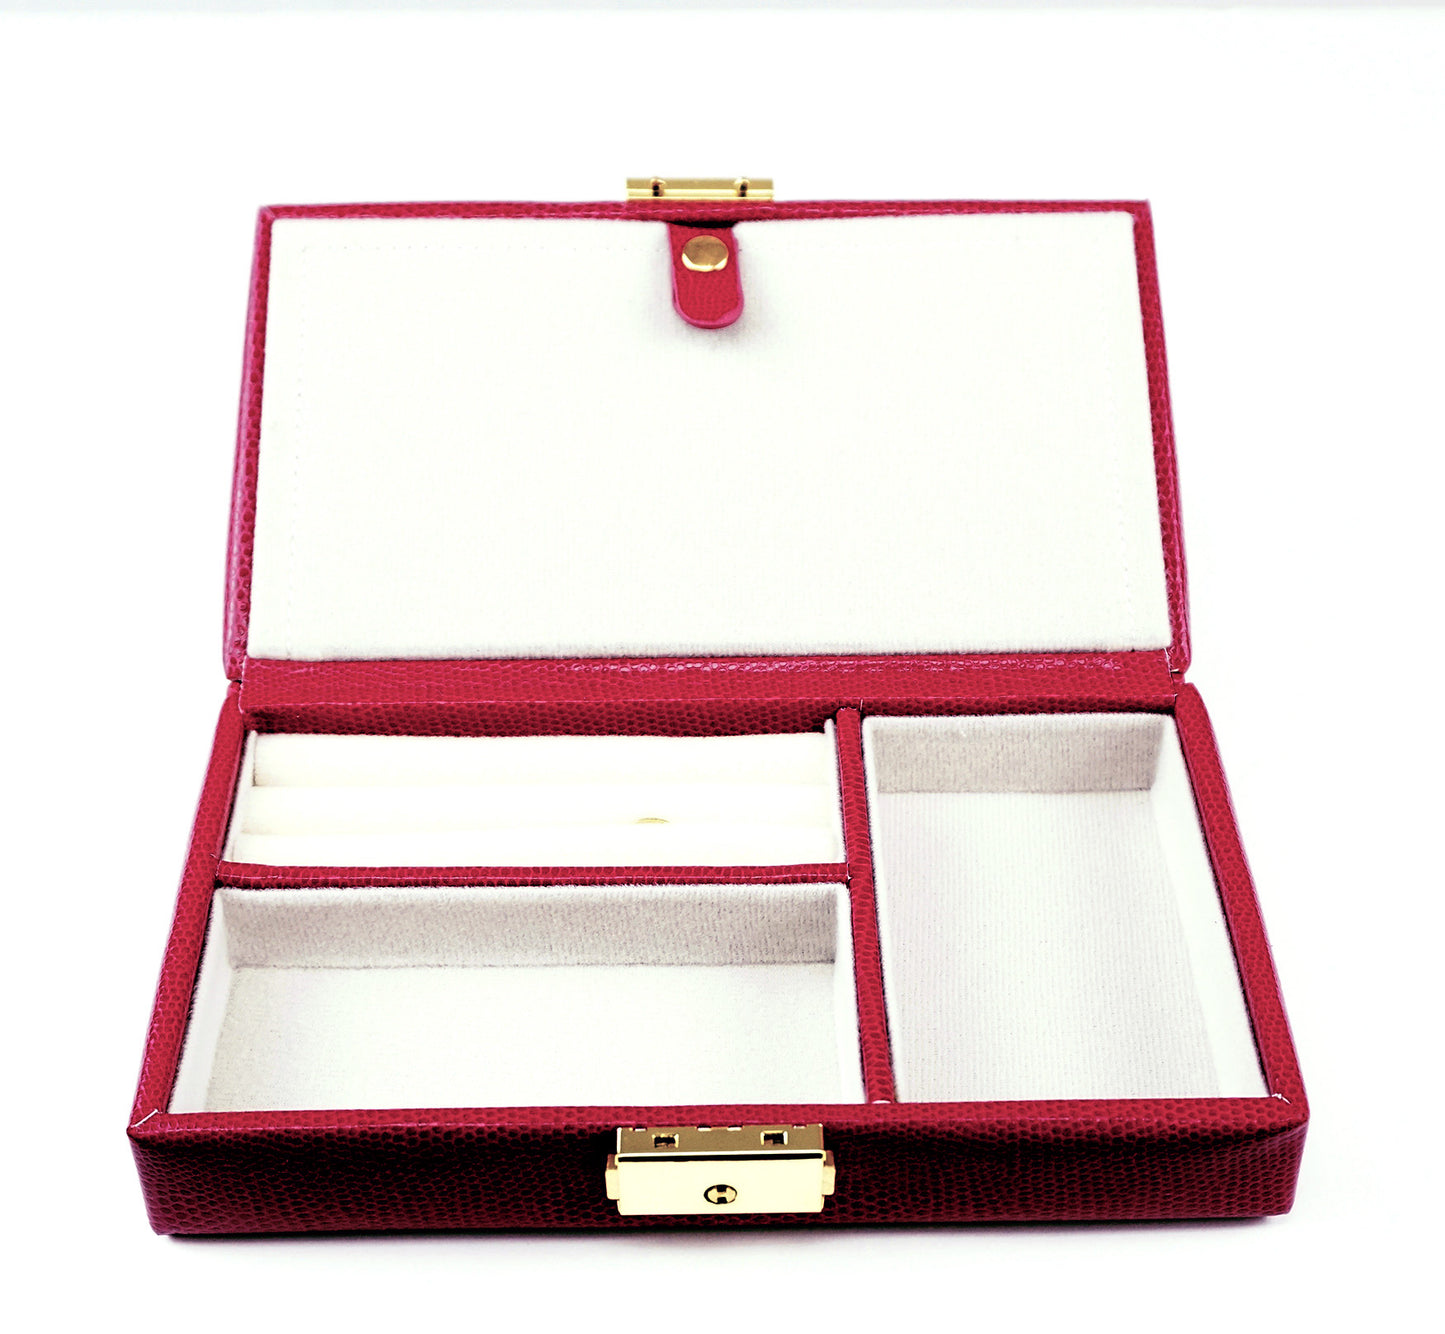 Leather Jewelry Box ~ Fuchsia Leather Jewelry Box with Interior Compartments for Needlepoint Canvas LEE